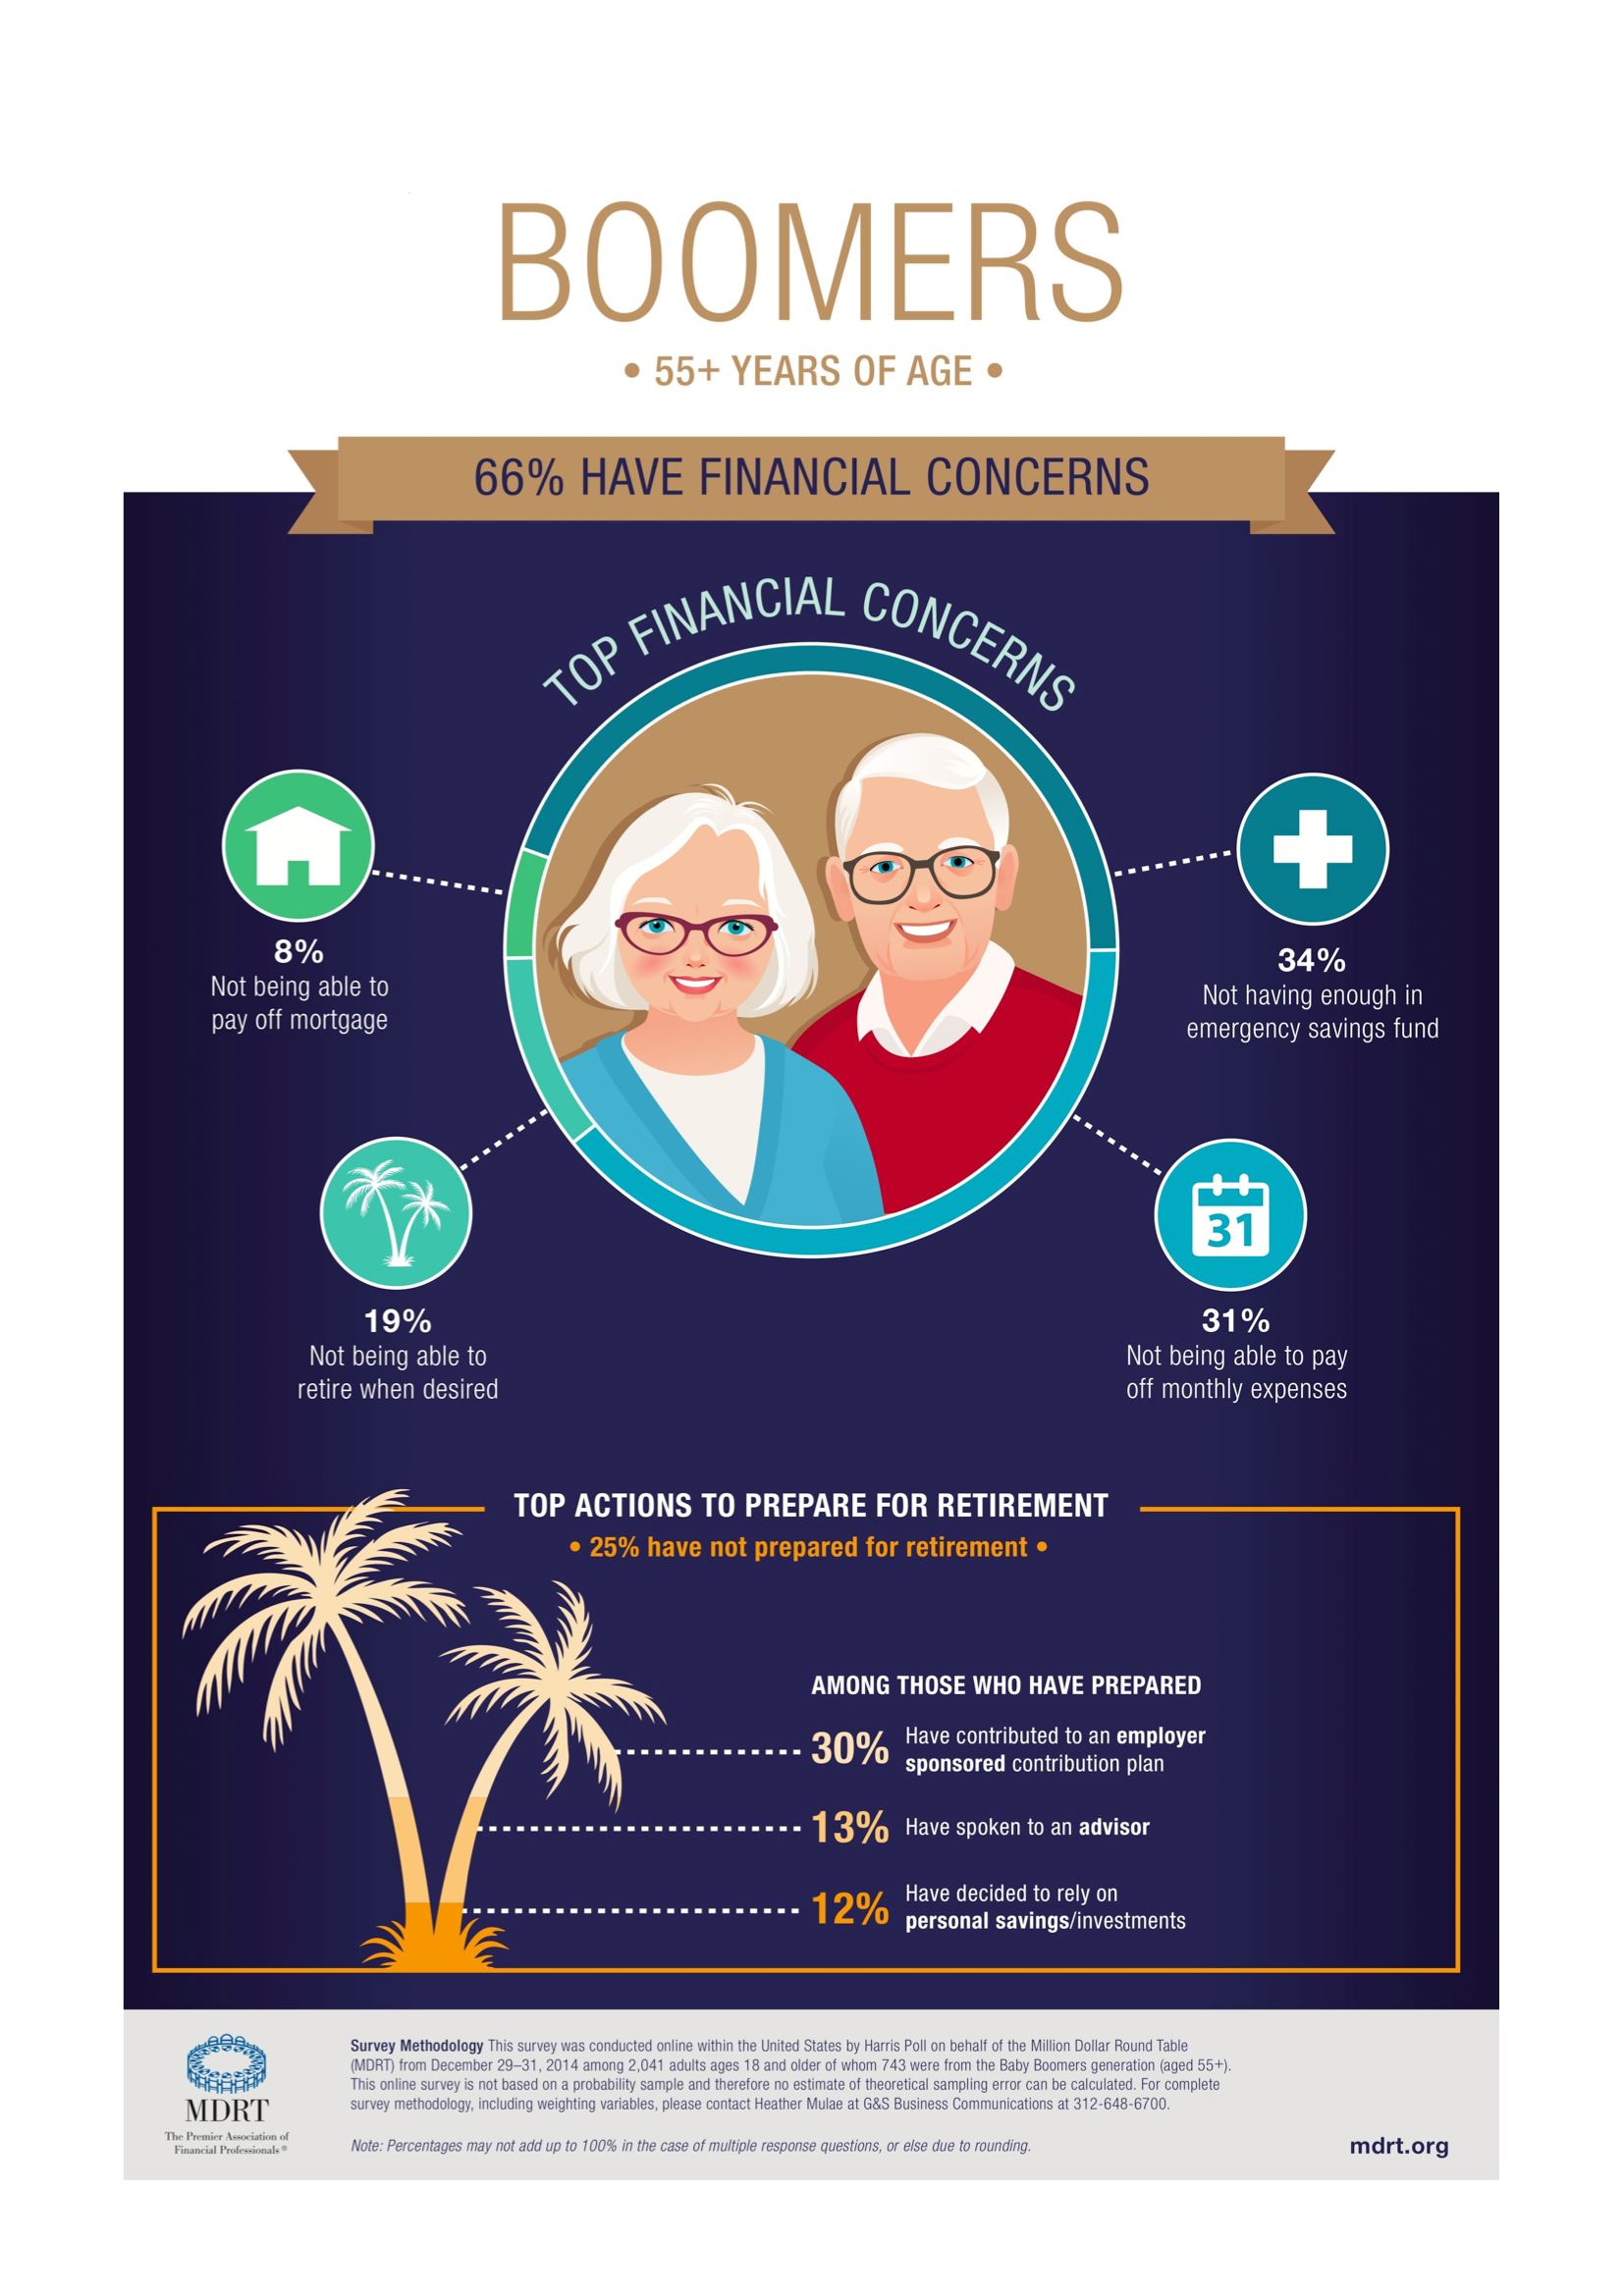 Baby Boomers: Top Financial Concerns